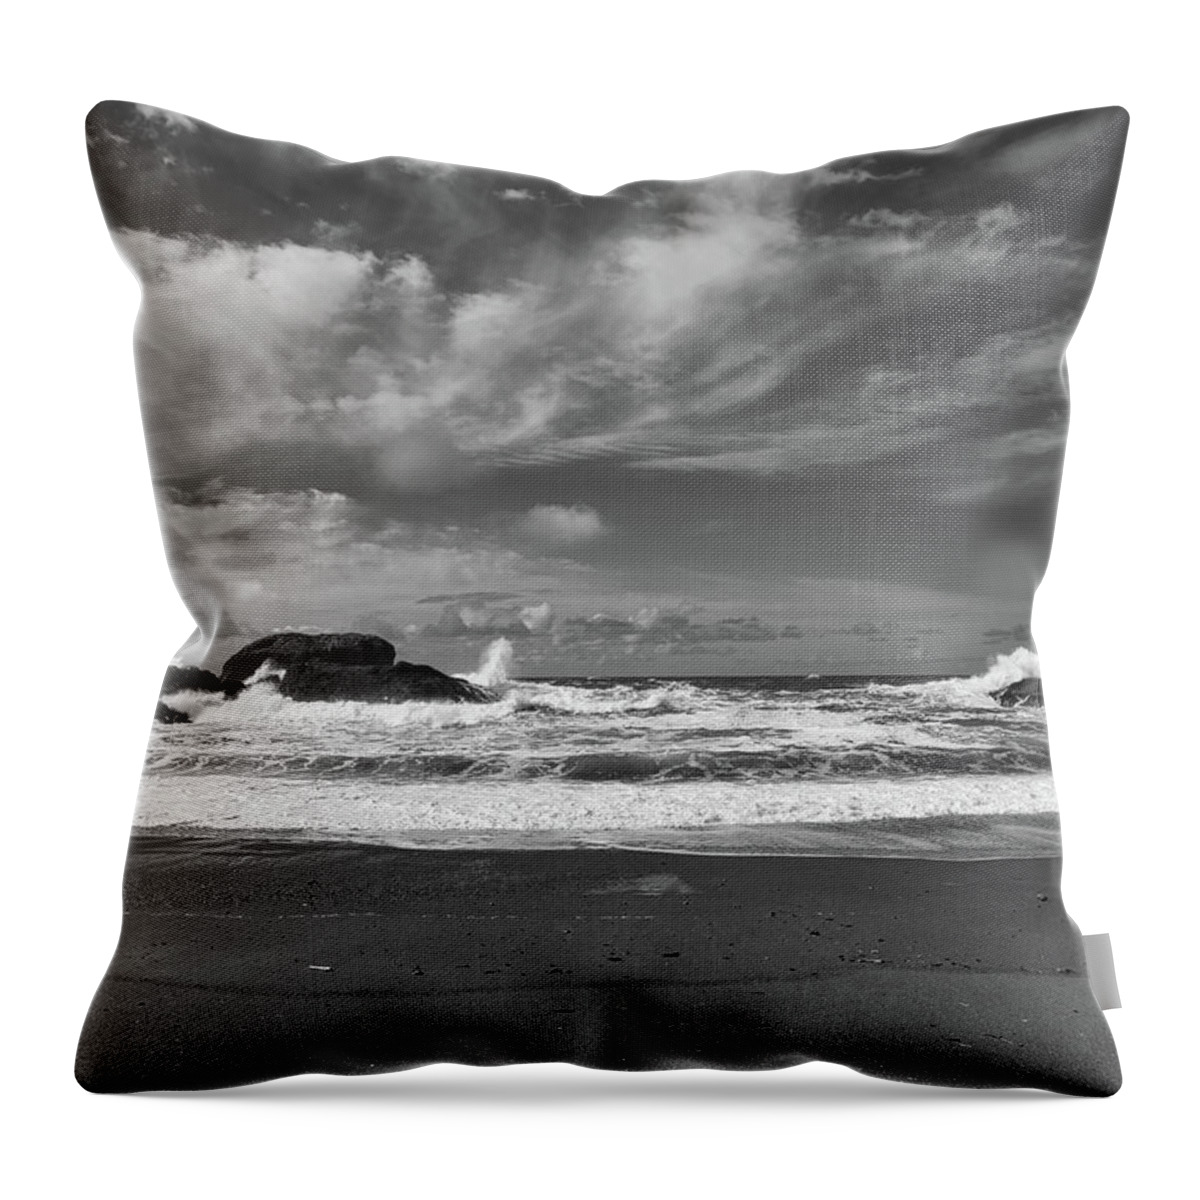 Landscape Throw Pillow featuring the photograph South Beach Vista Black and White by Allan Van Gasbeck